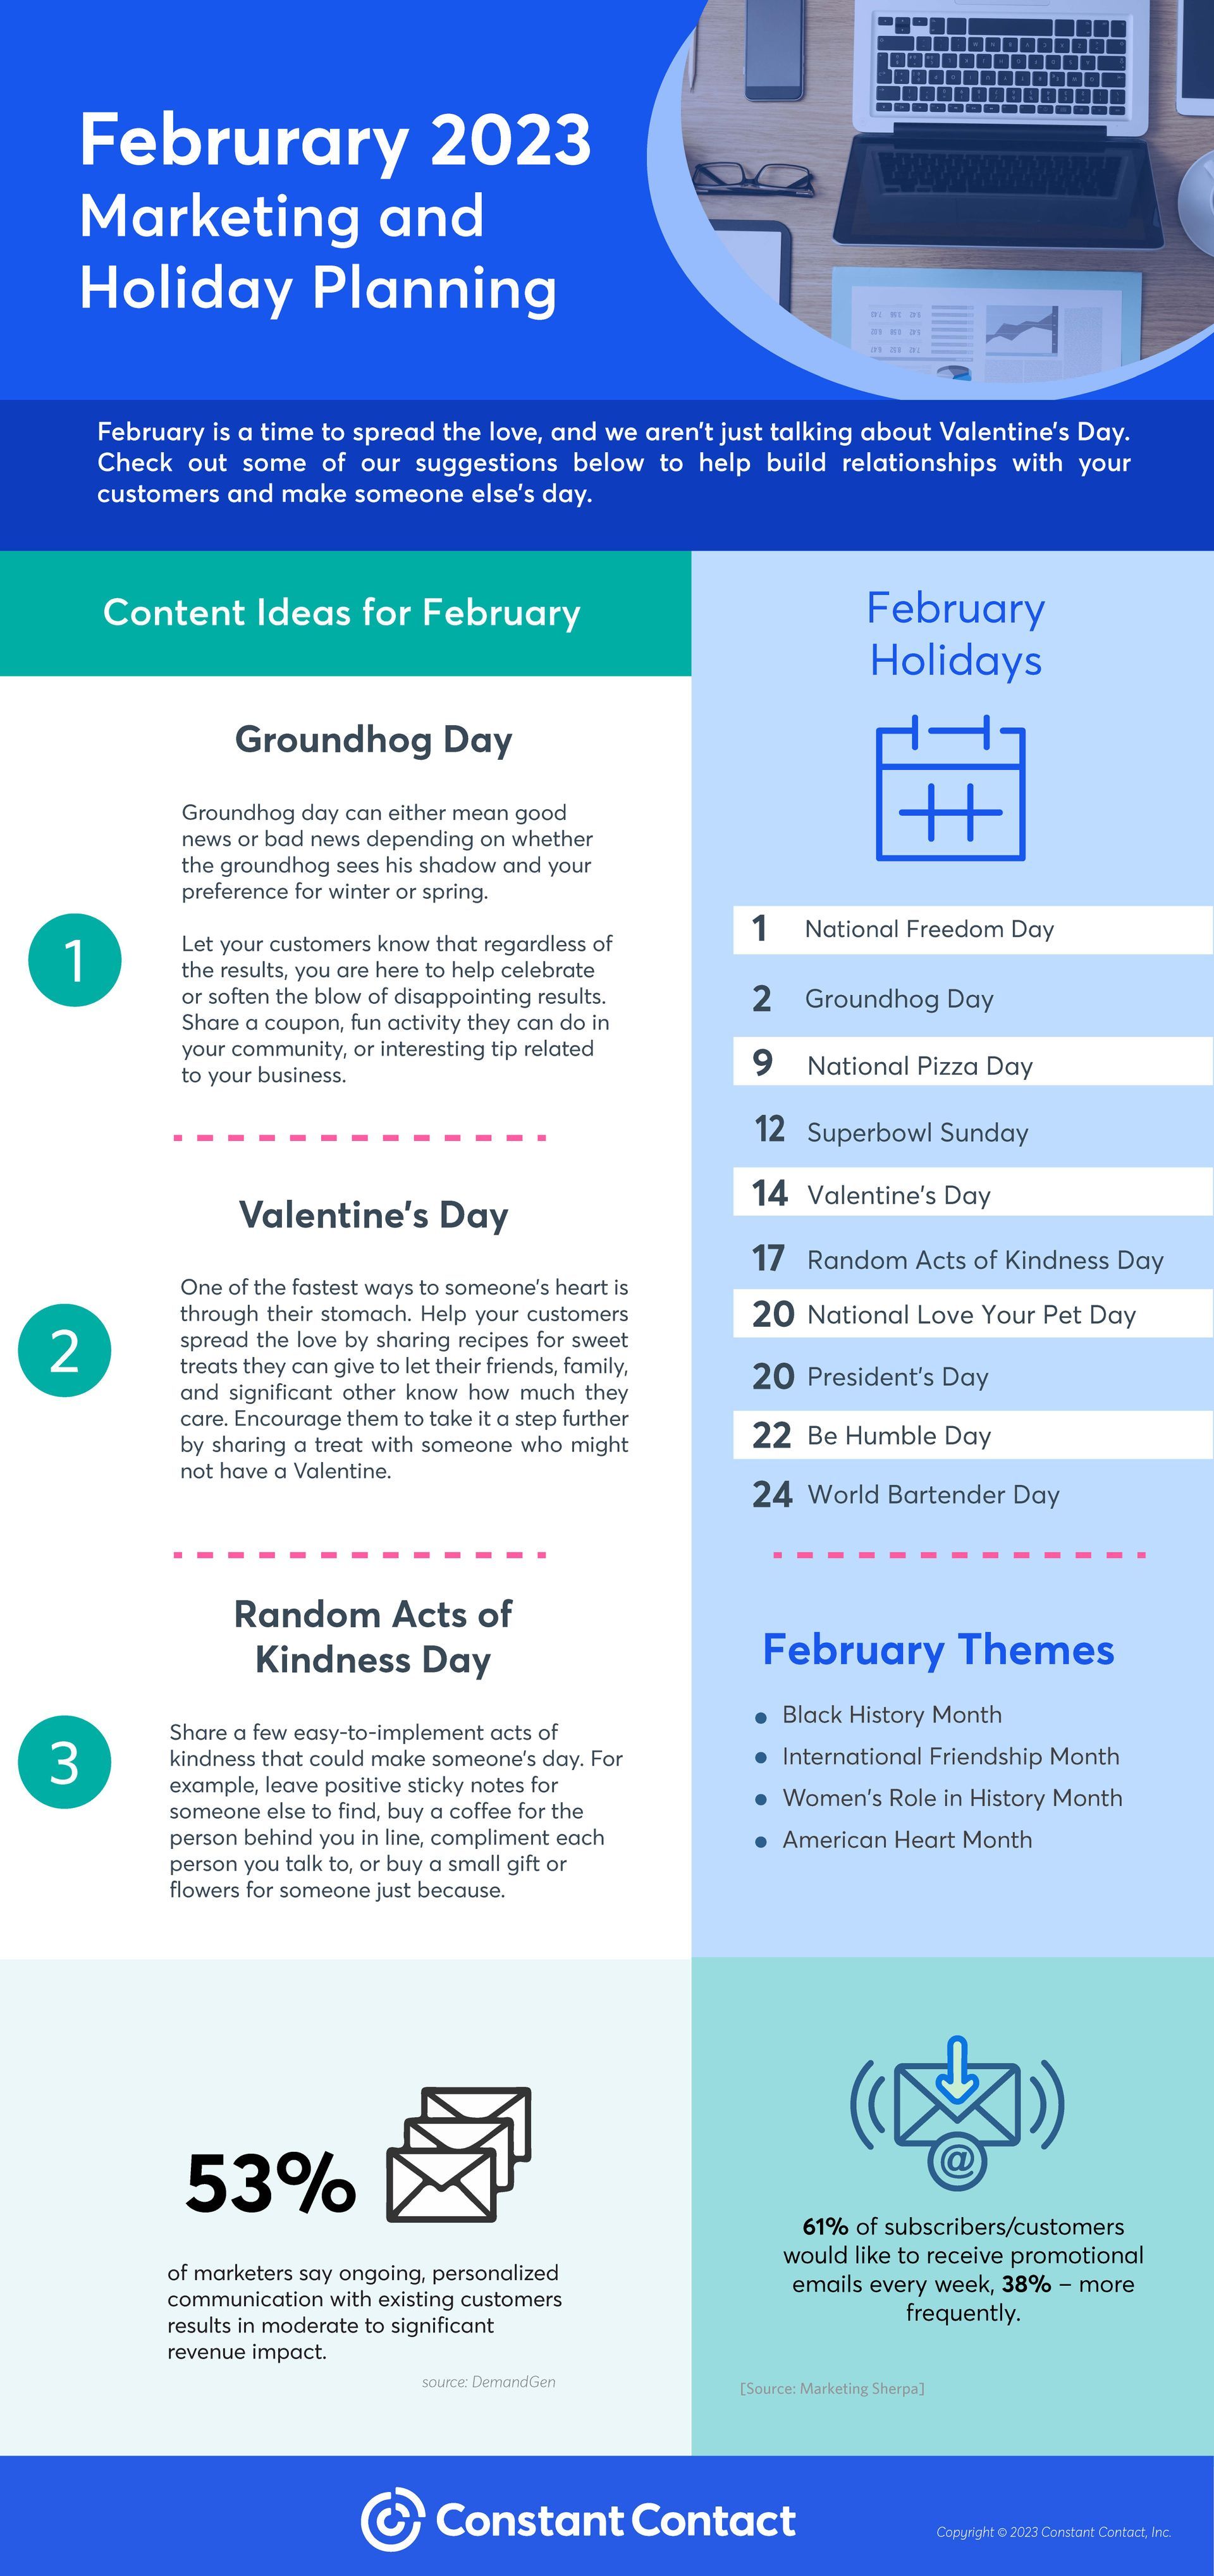 2023 February Holiday Infographic from Constant Contact